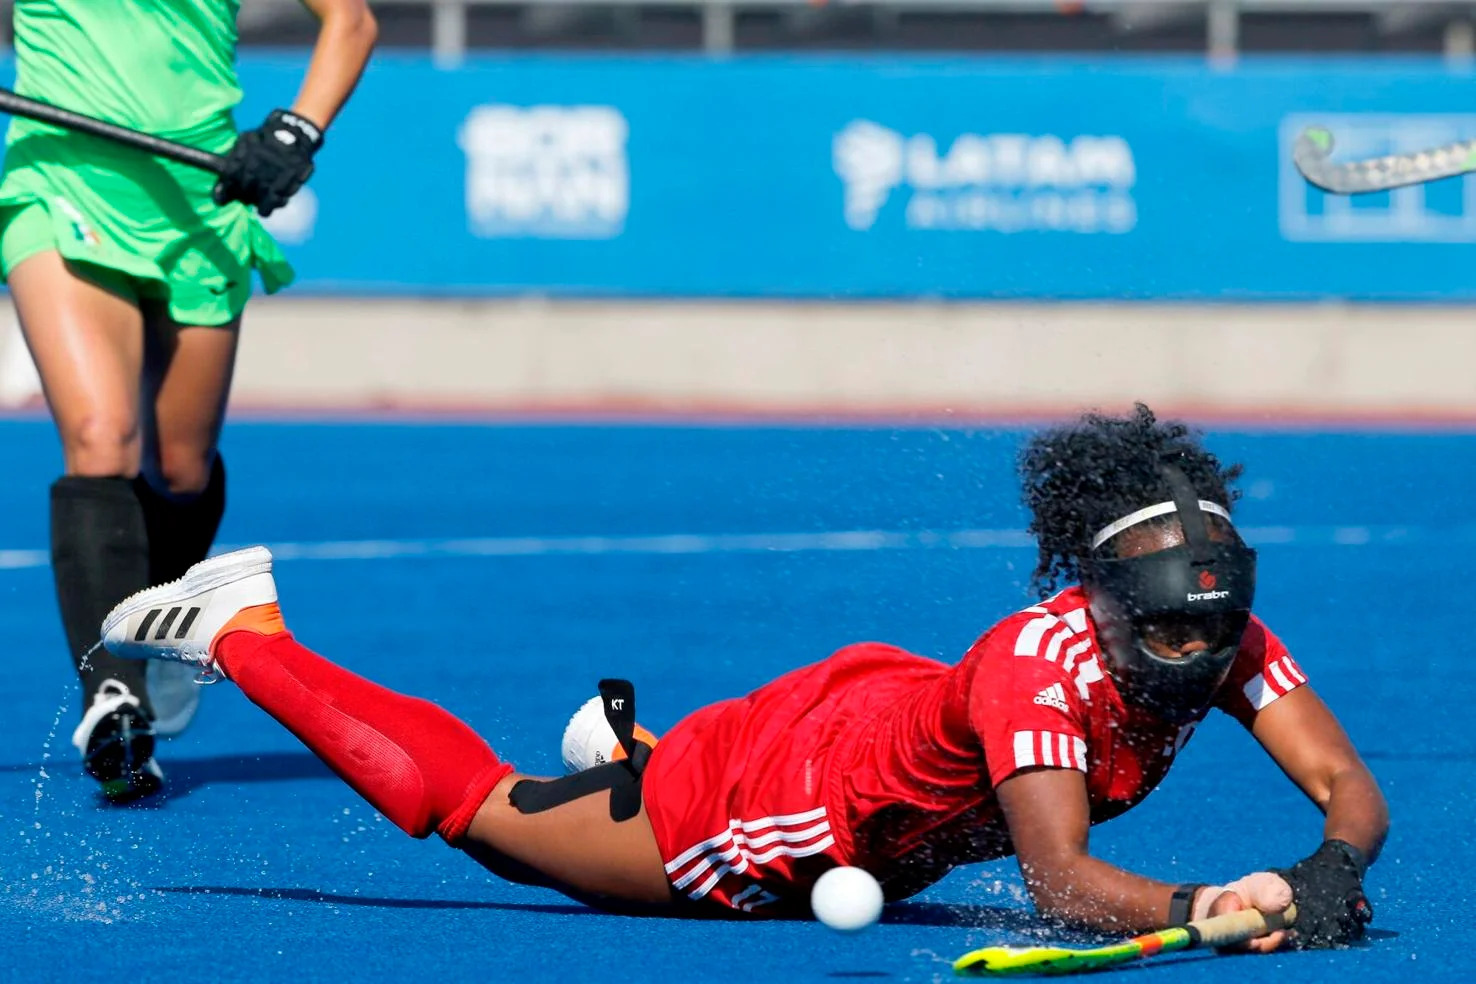 DESPERATE EFFORT: TEAM TTO’s Katherine Benjamin, part of the team’s defensive corner unit, goes to ground to stop a Mexico penalty corner shot during their women’s 7th to 8th place playoff yesterday at the Centro Deportivo de Hockey Césped. TTO showed grit to earn a 1-0 win at the Santiago 2023 Pan American Games.  —Photo: Photosport/ Panam Sports (Image obtained at trinidadexpress.com)